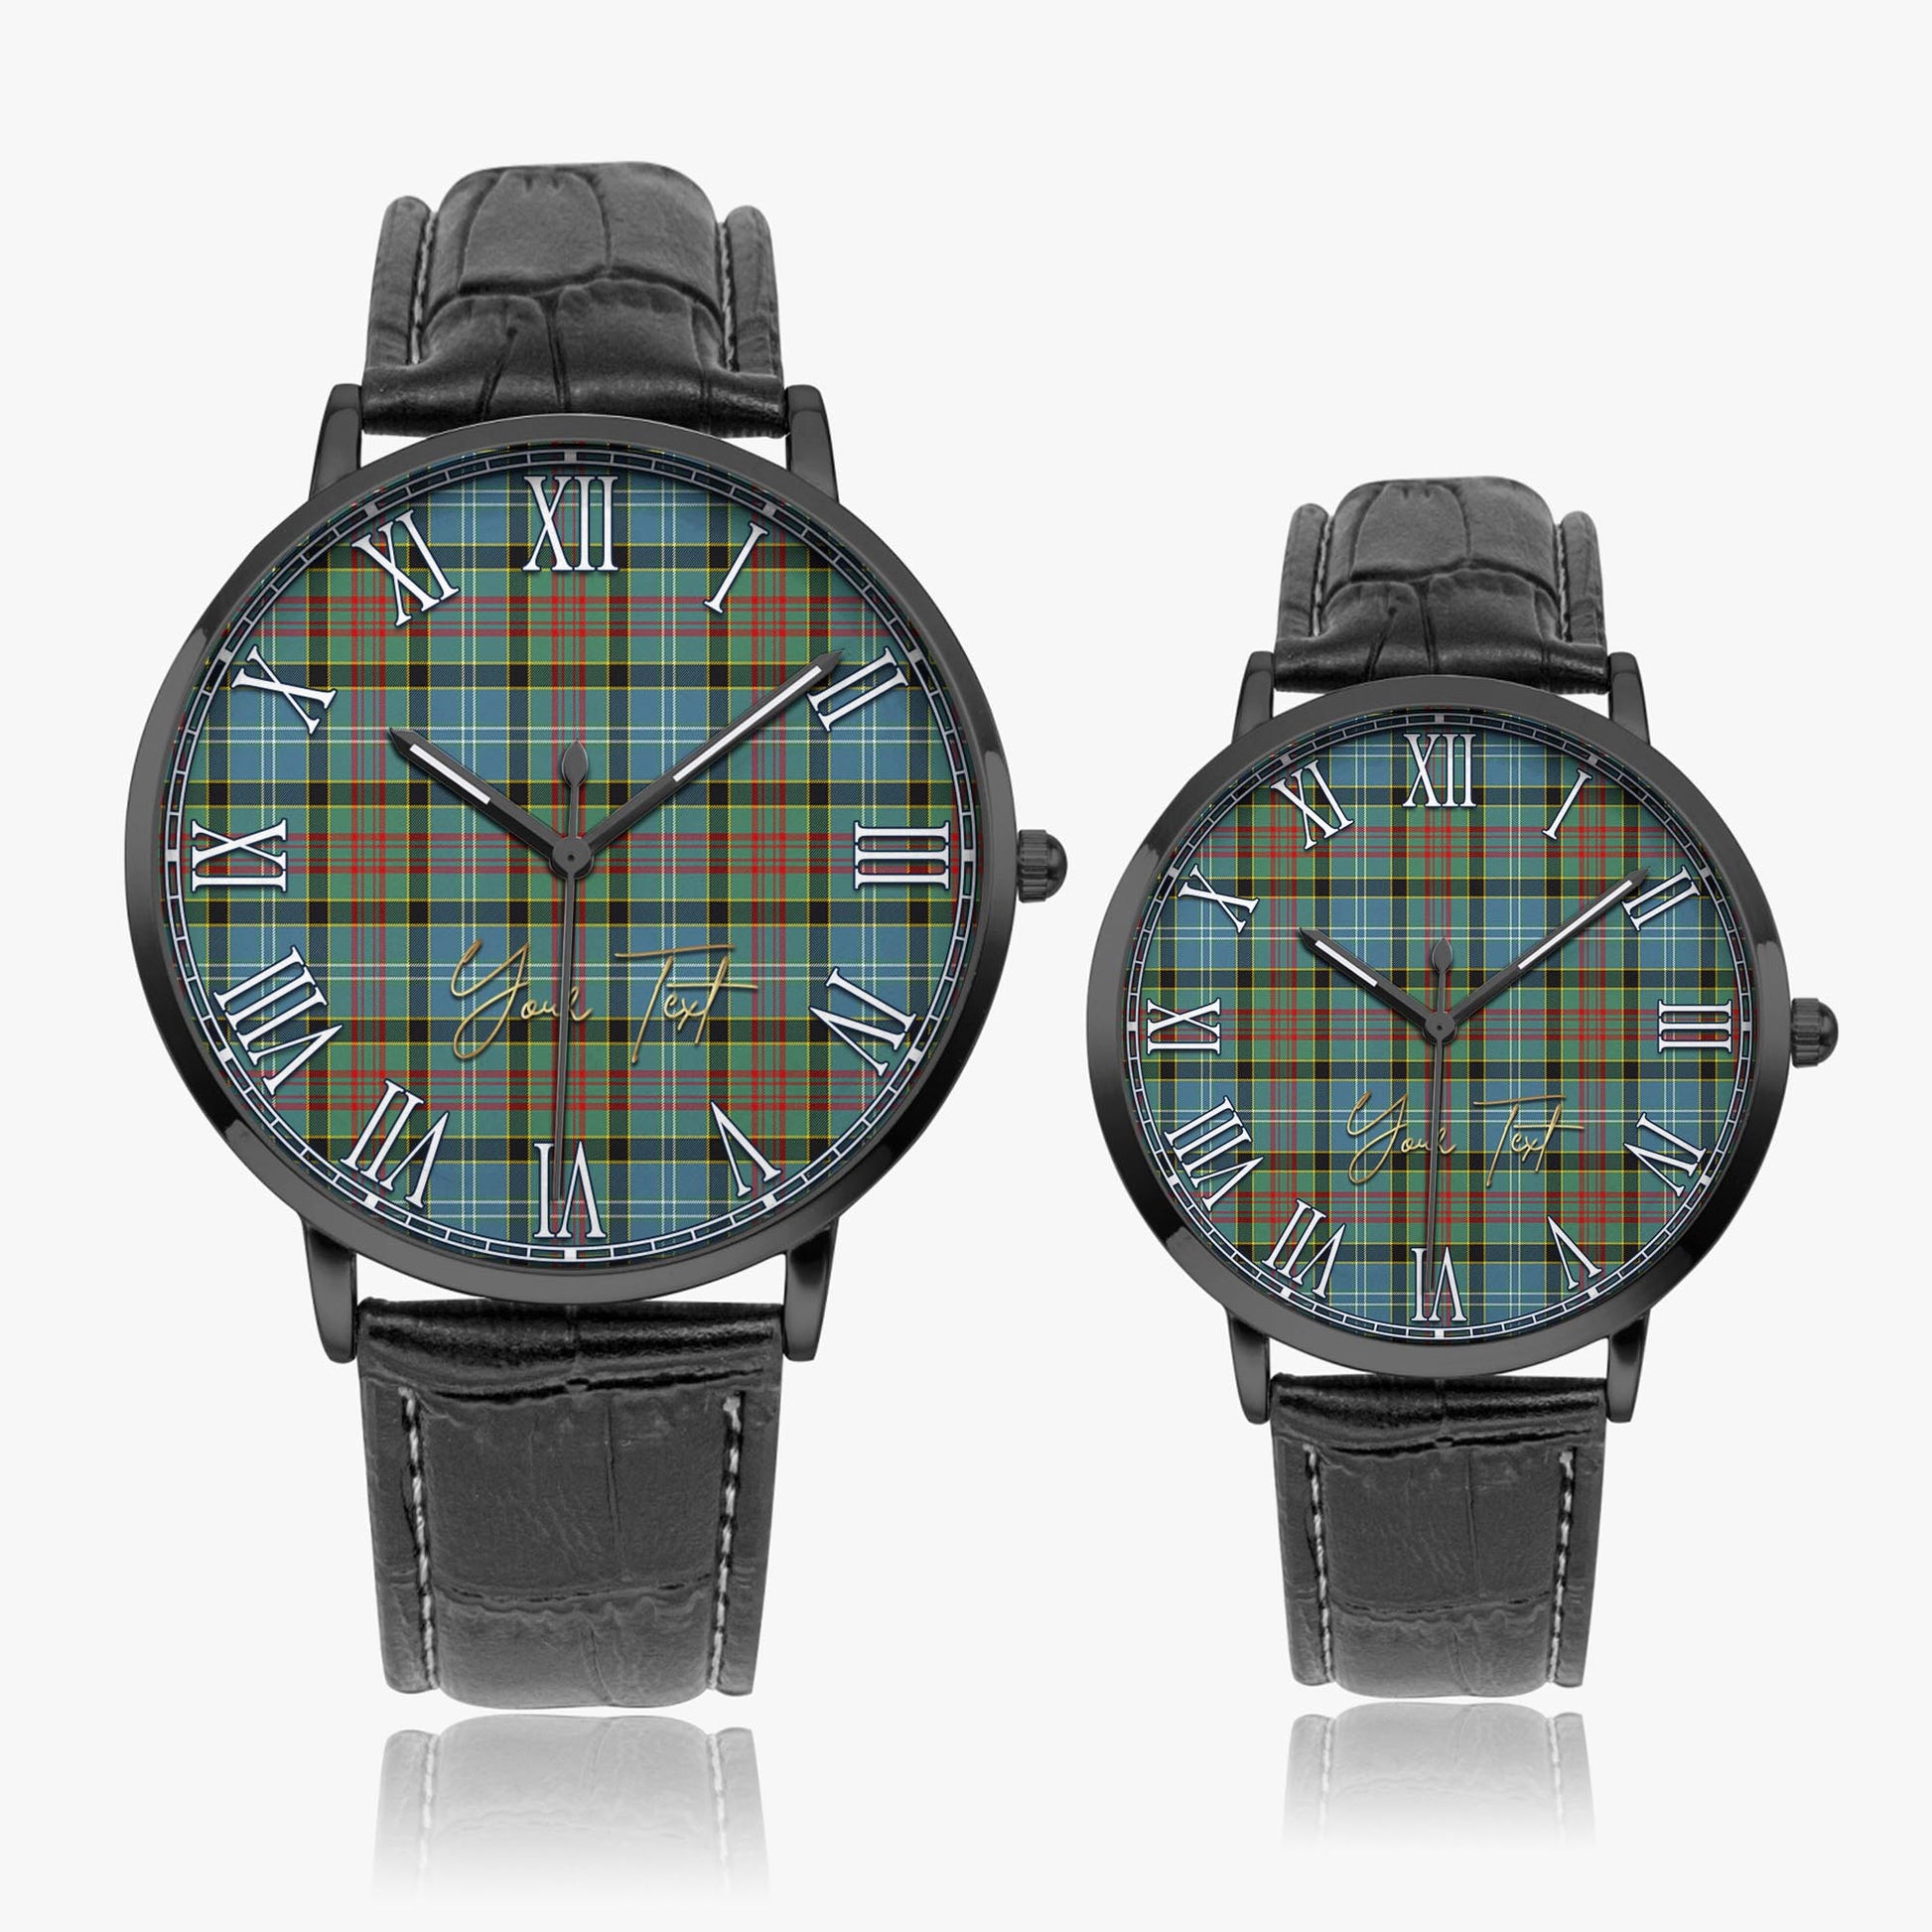 Walkinshaw Tartan Personalized Your Text Leather Trap Quartz Watch Ultra Thin Black Case With Black Leather Strap - Tartanvibesclothing Shop